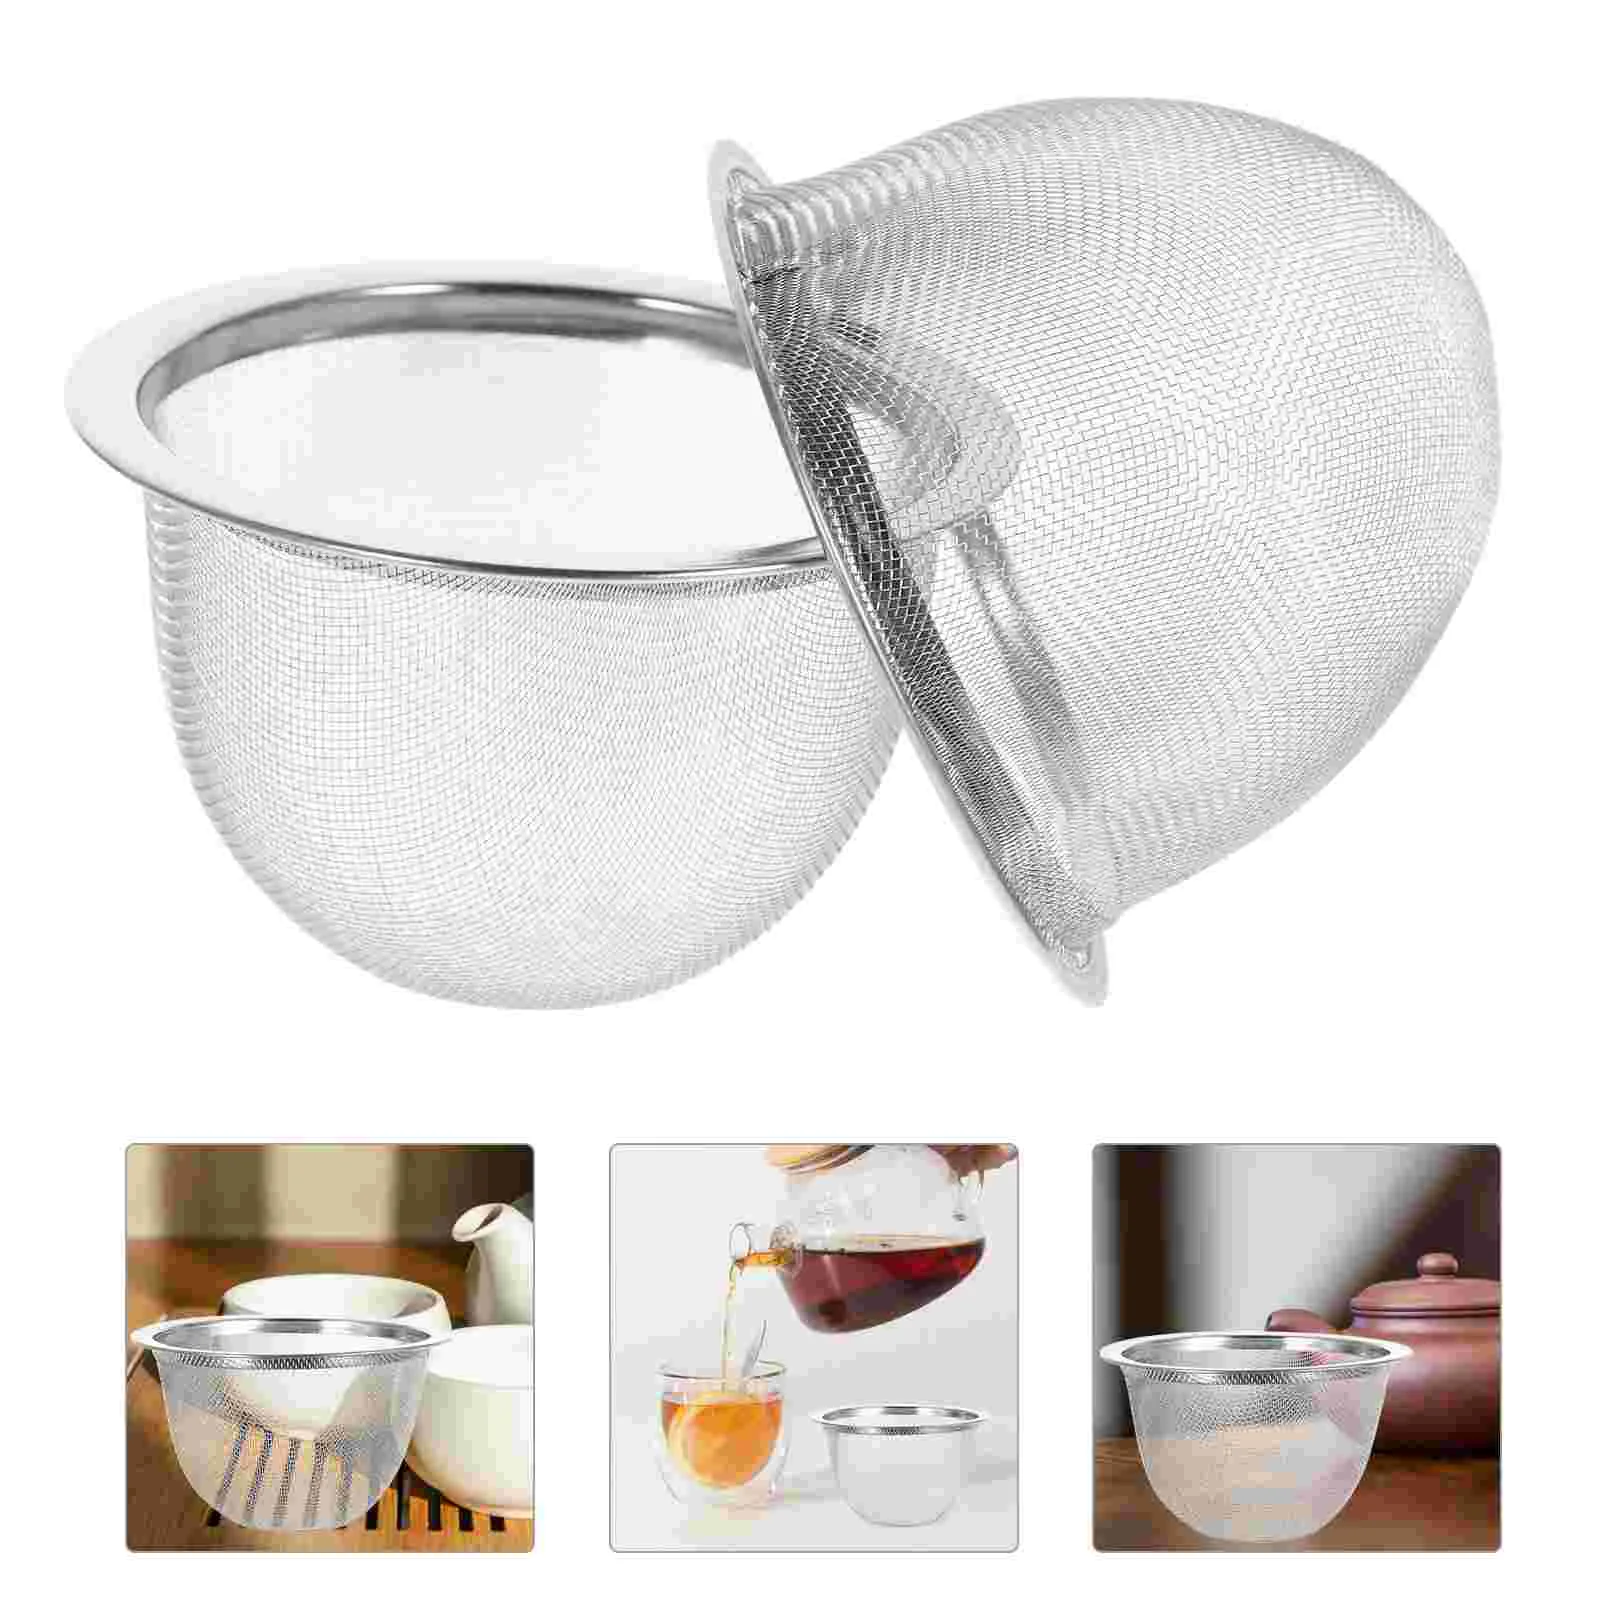 

8PCS Stainless Steel Tea Infuser Mesh Strainer Water Filter For Hanging On Teapots Mugs Cups To Steep Loose Leaf Coffee (